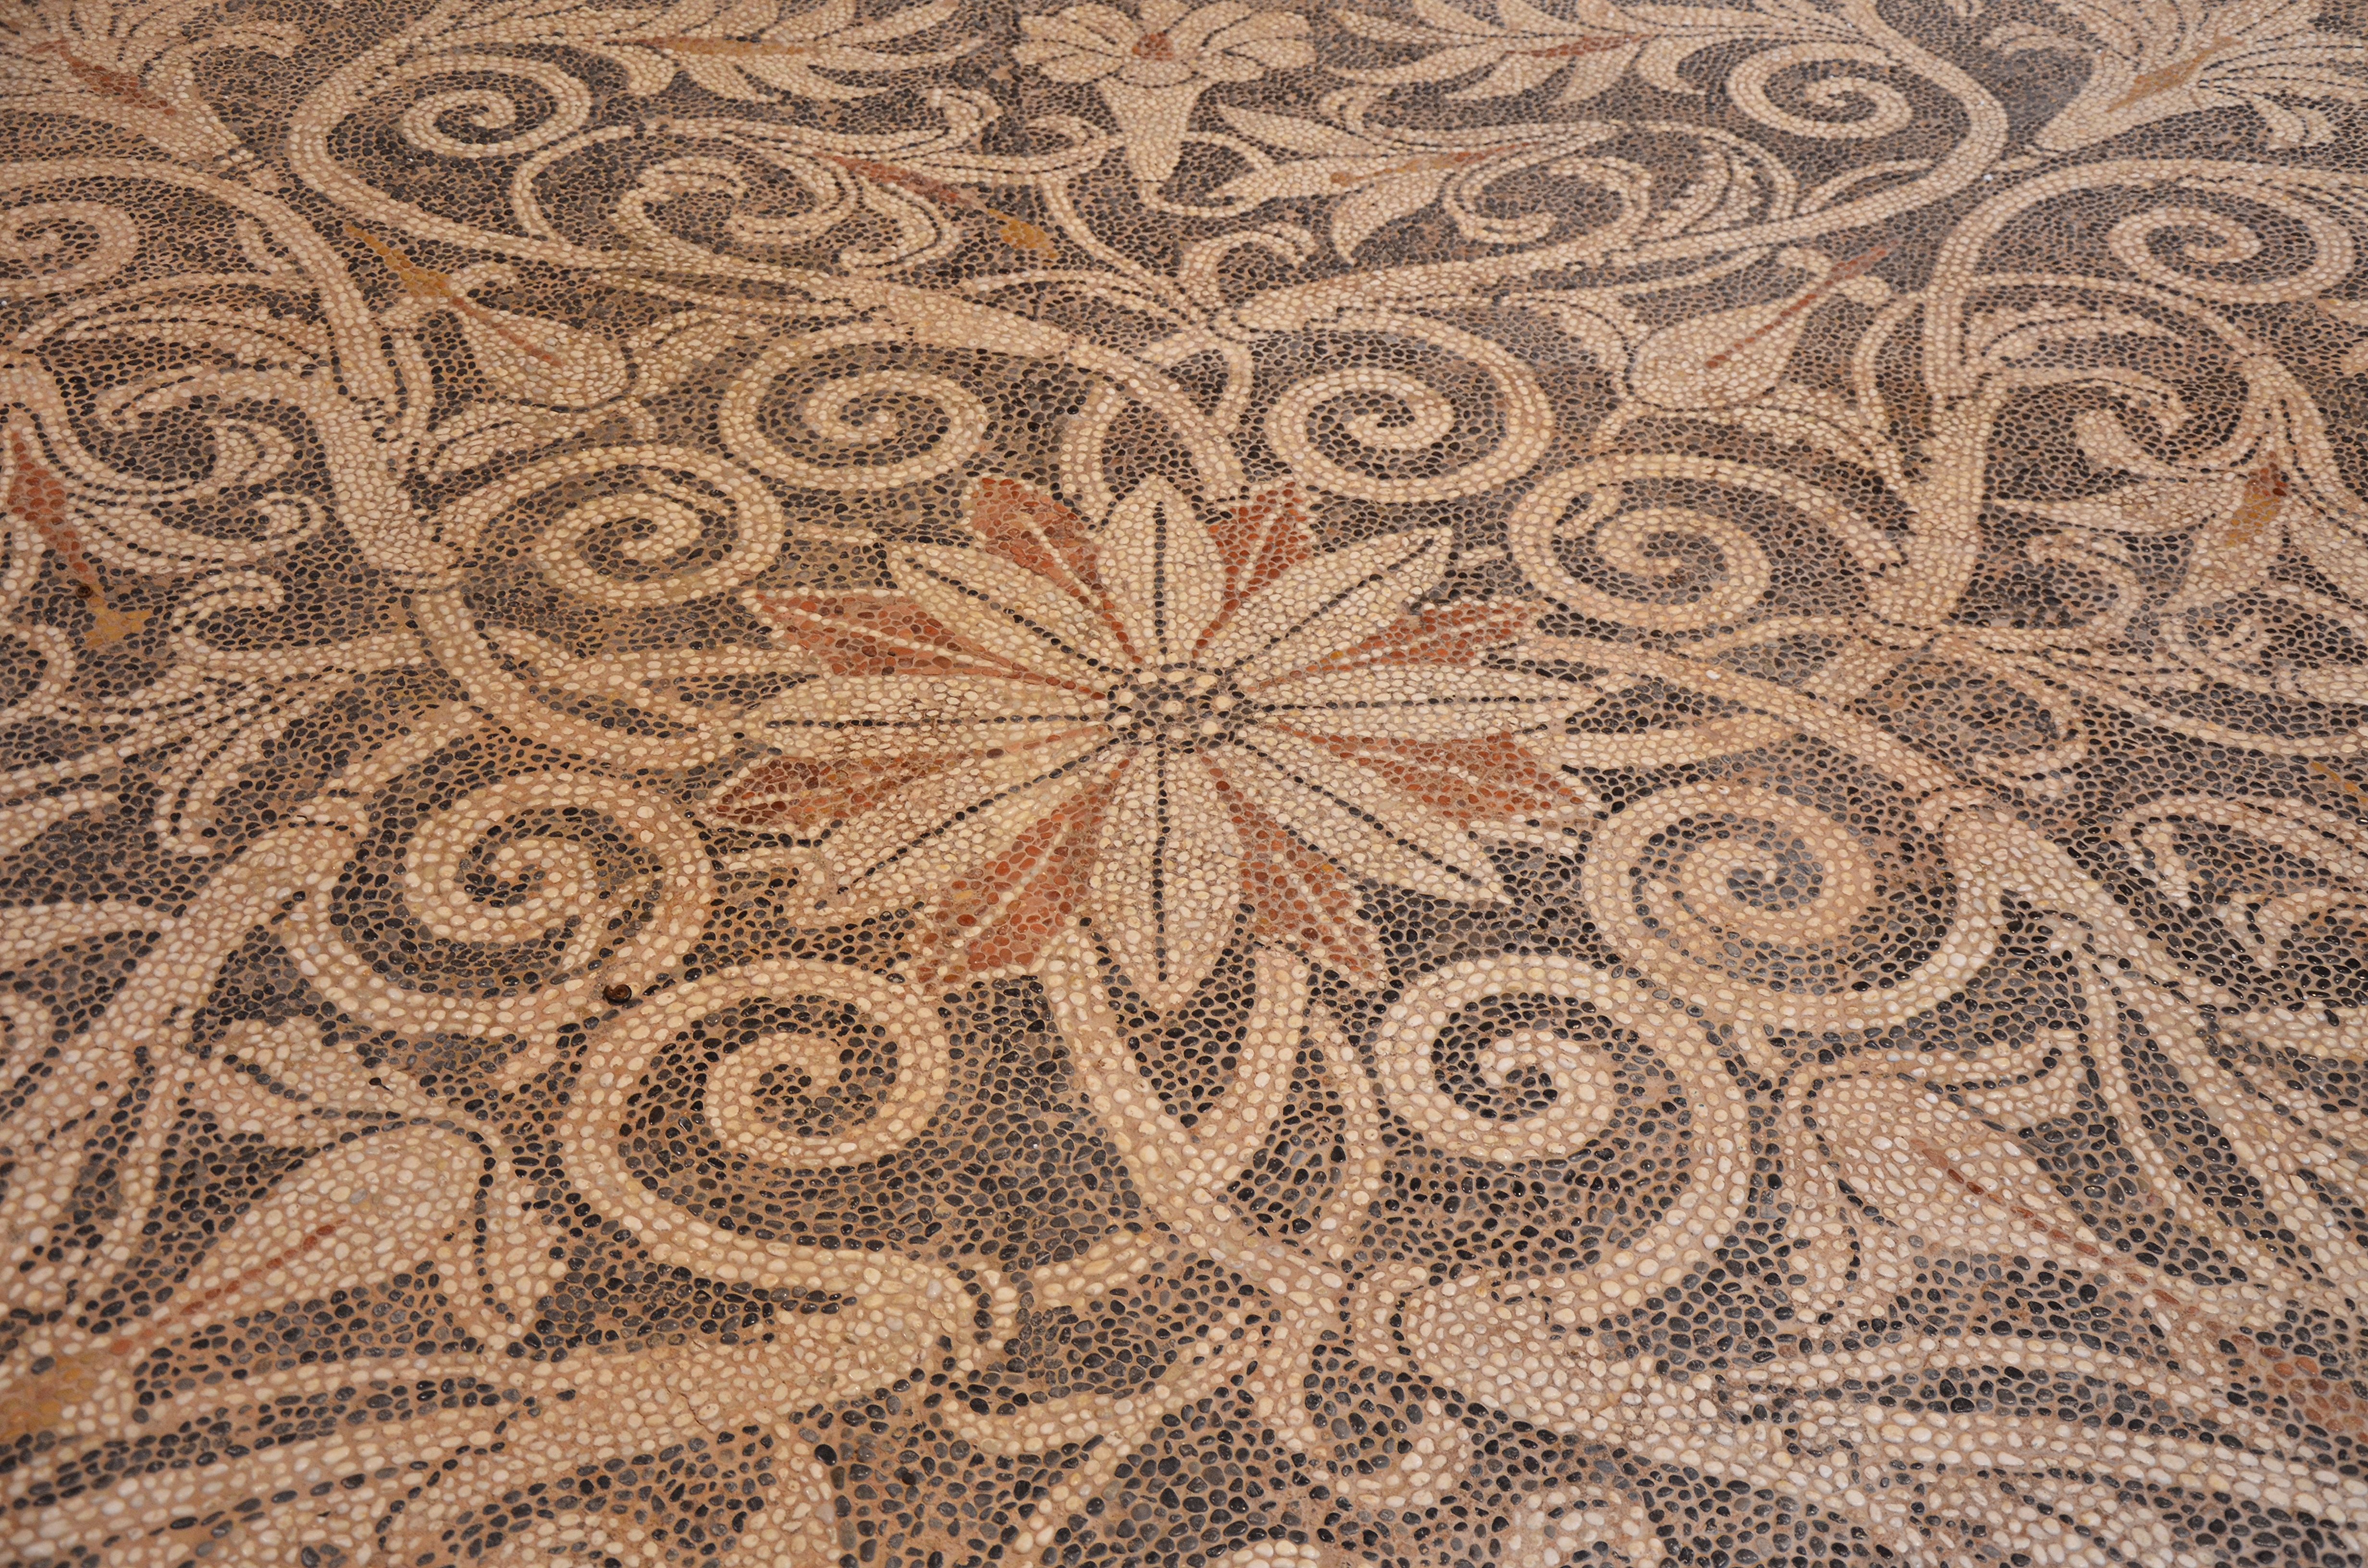 File:Pebble mosaic floor with floral decoration, from Ancient Sikyon ...